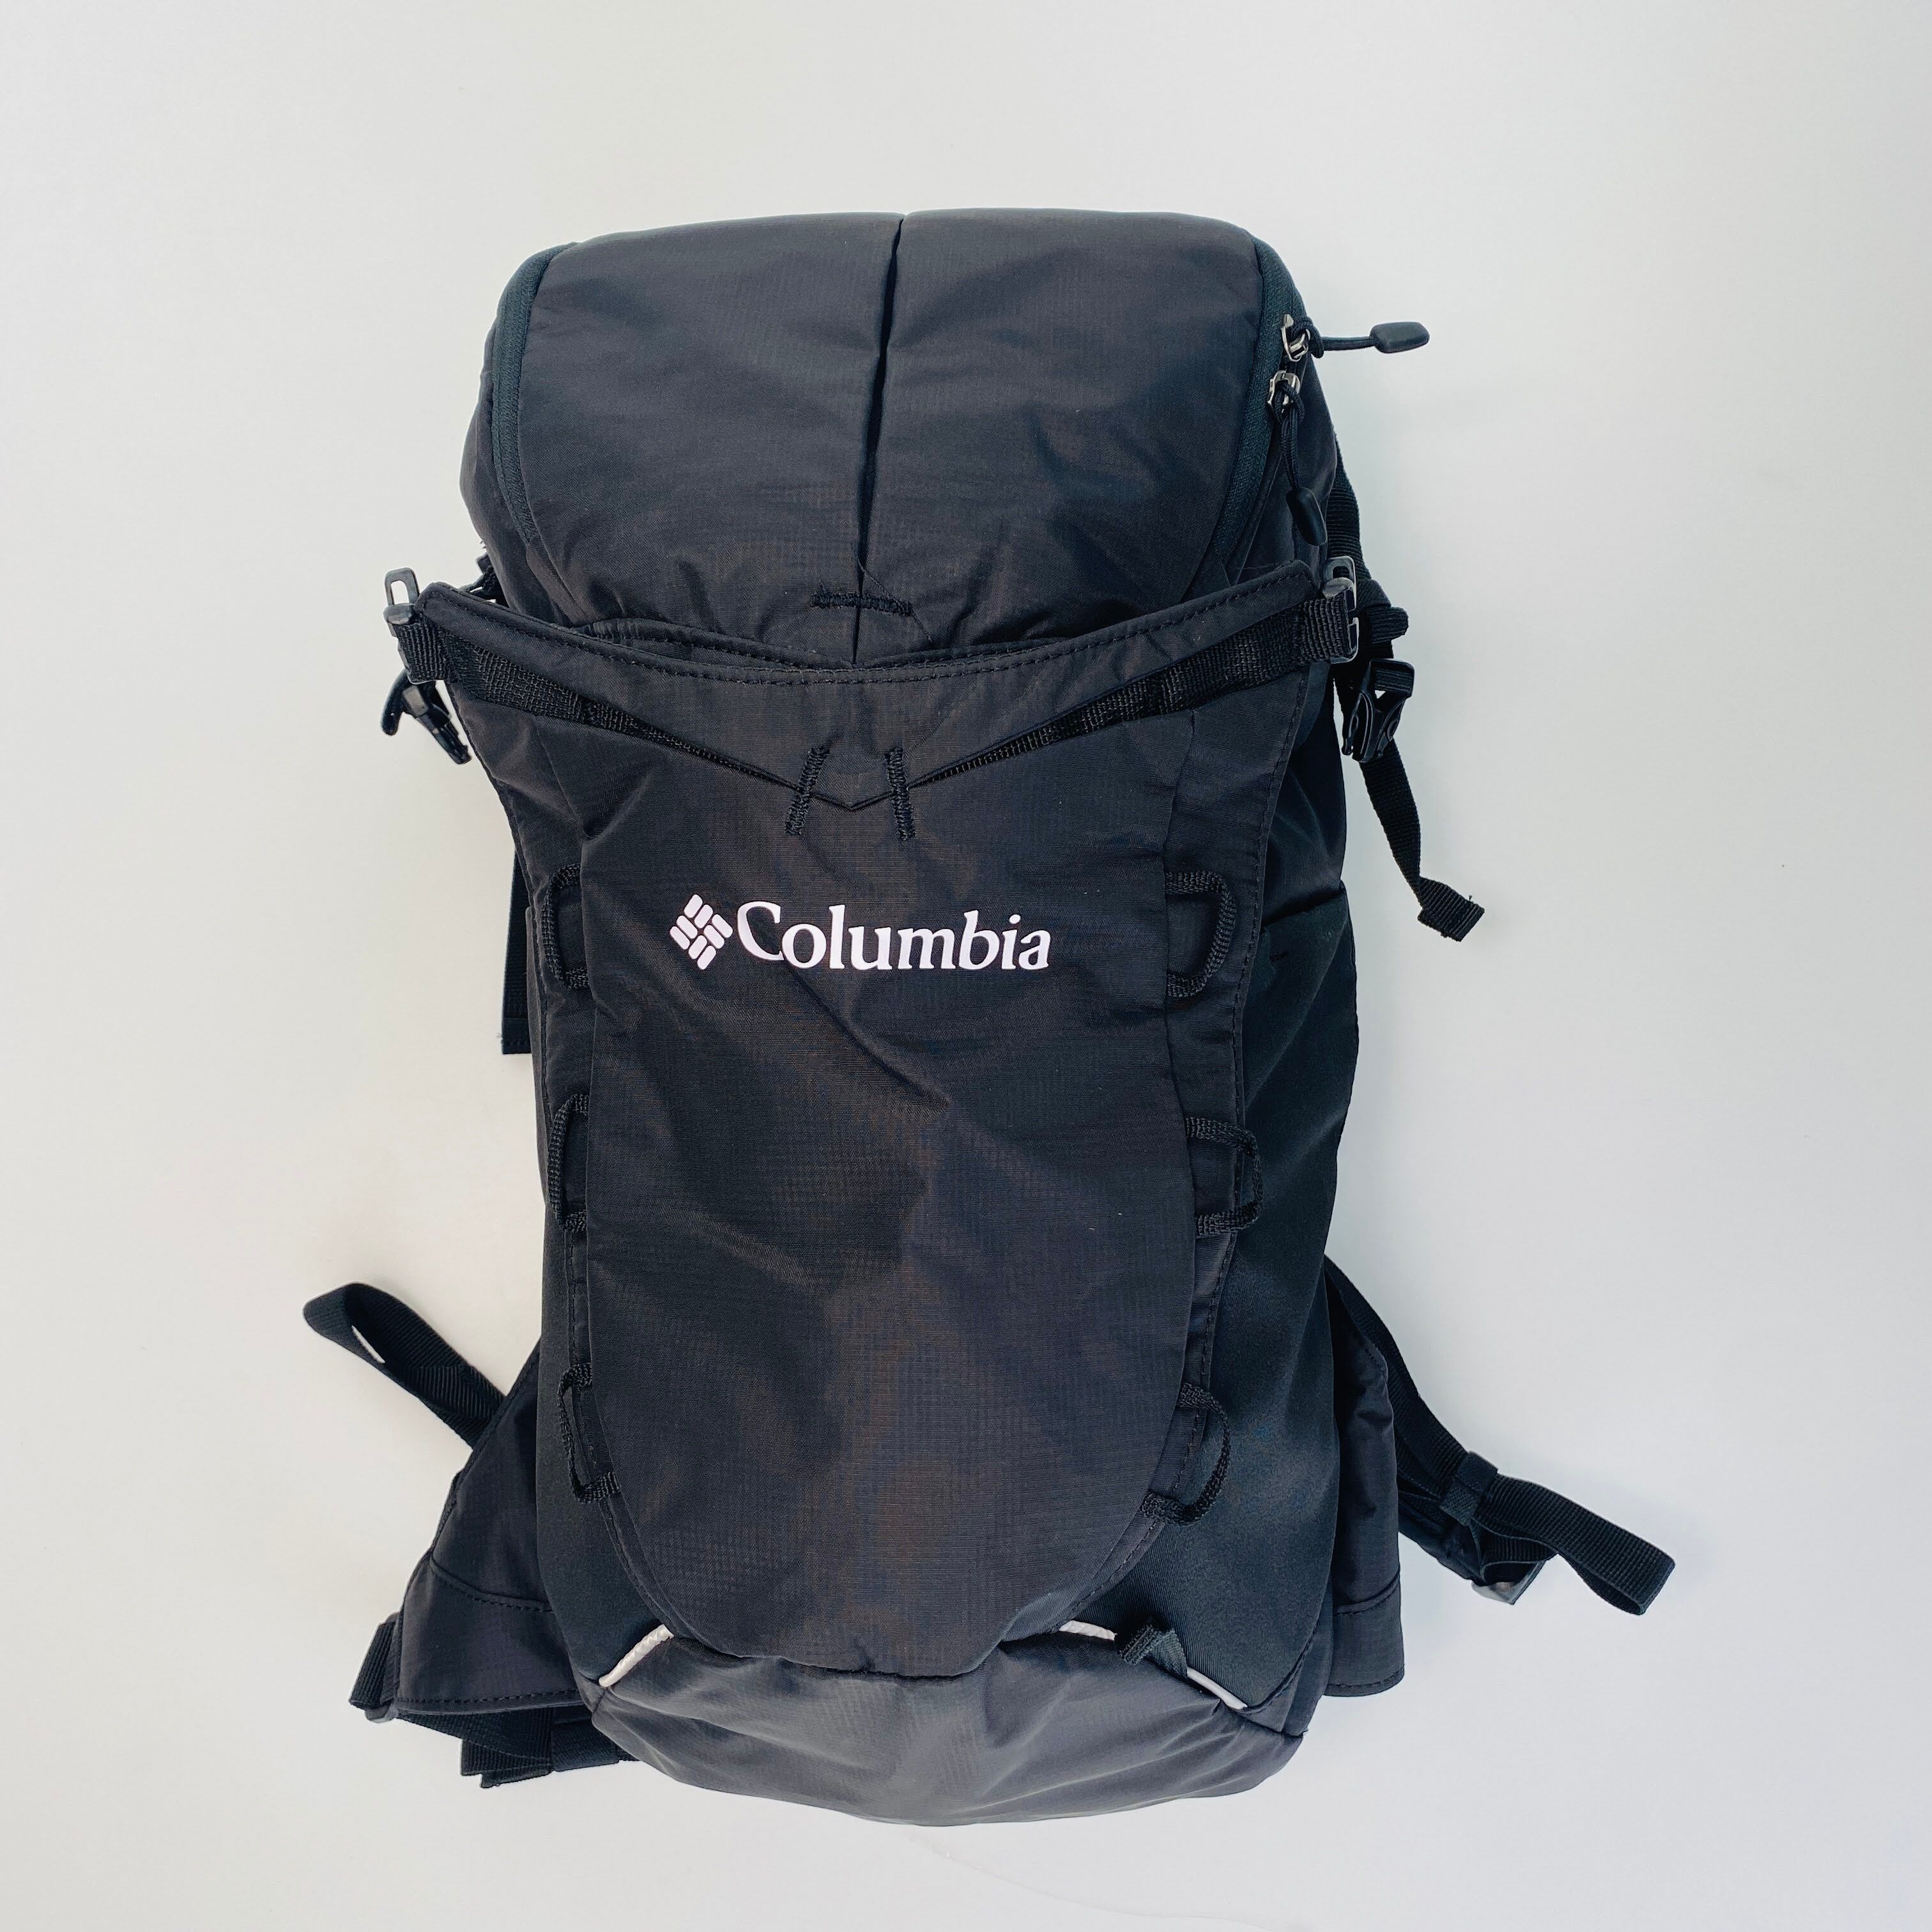 Columbia Shadow Falls™ II Hydration - Seconde main Sac à dos d'hydratation - Noir - Taille unique | Hardloop